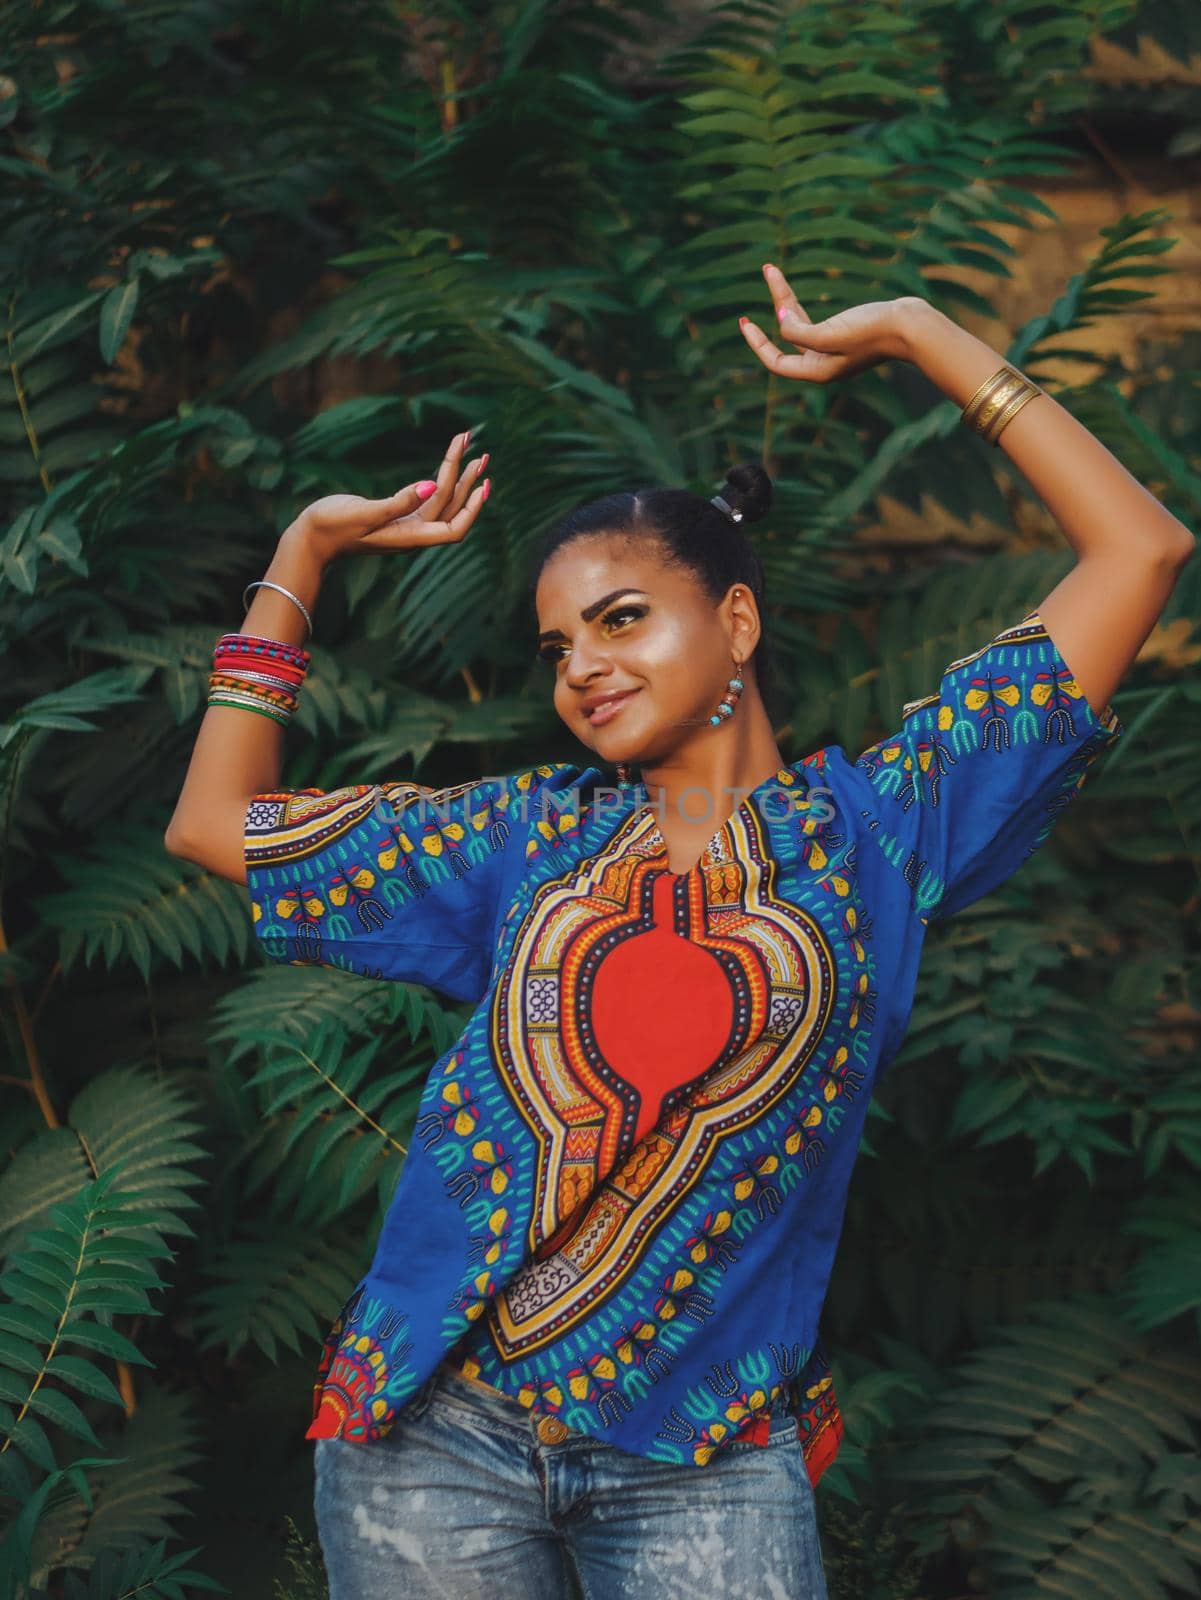 Afro-american woman outdoor. Multi ethnic girl wearing colorful clothing posing, enjoys the nature. Green tropical background